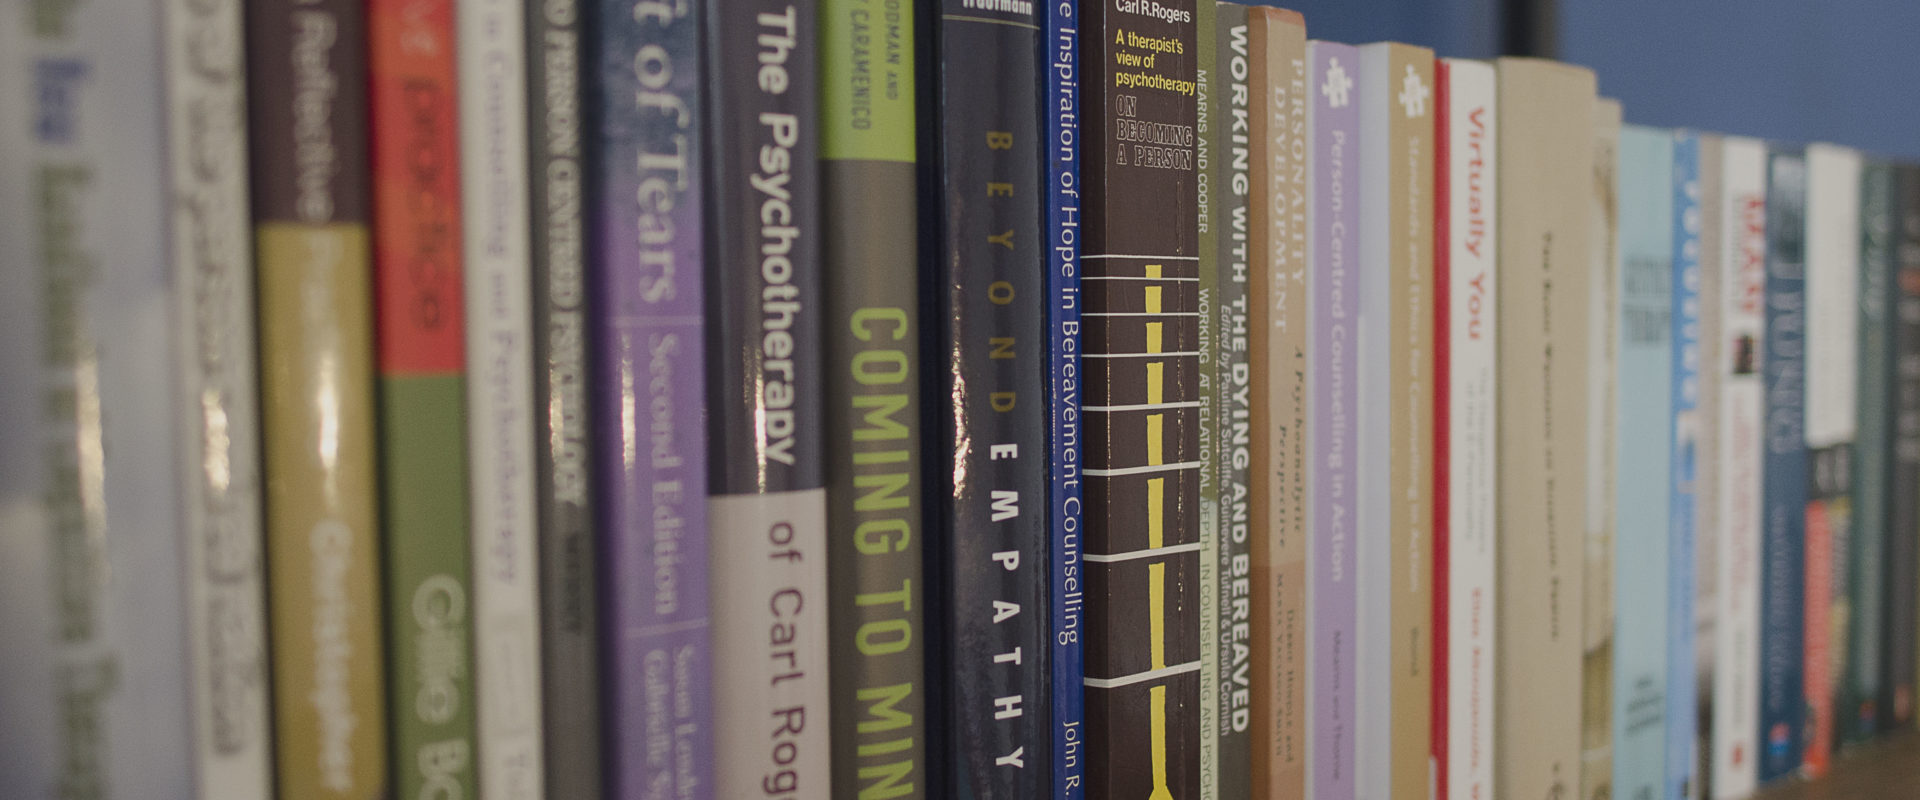 Bookshelf with counselling books